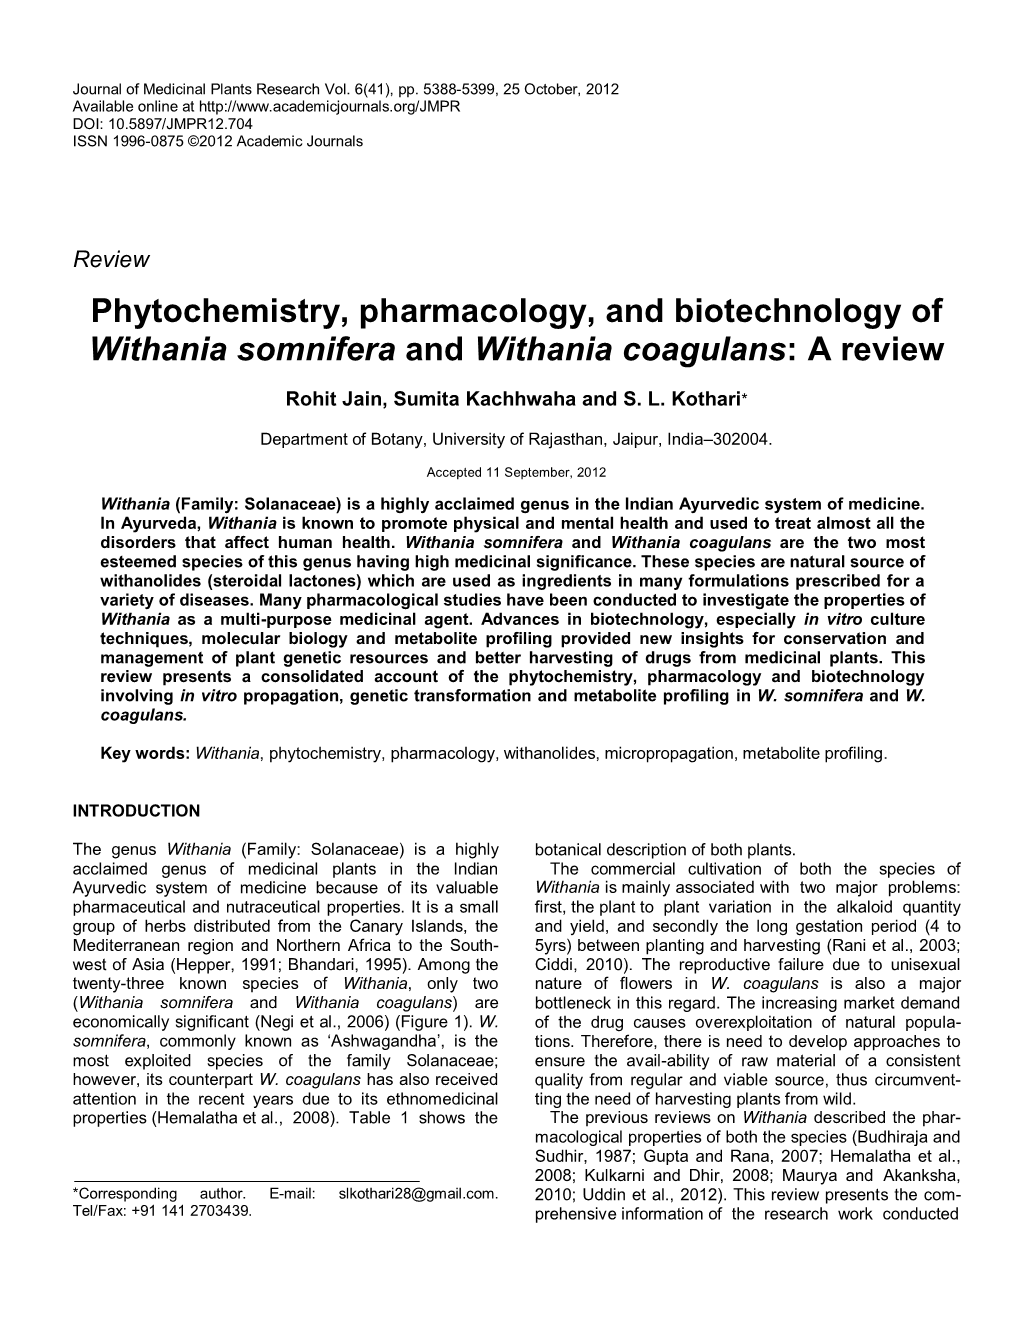 Phytochemistry, Pharmacology, and Biotechnology of Withania Somnifera and Withania Coagulans: a Review